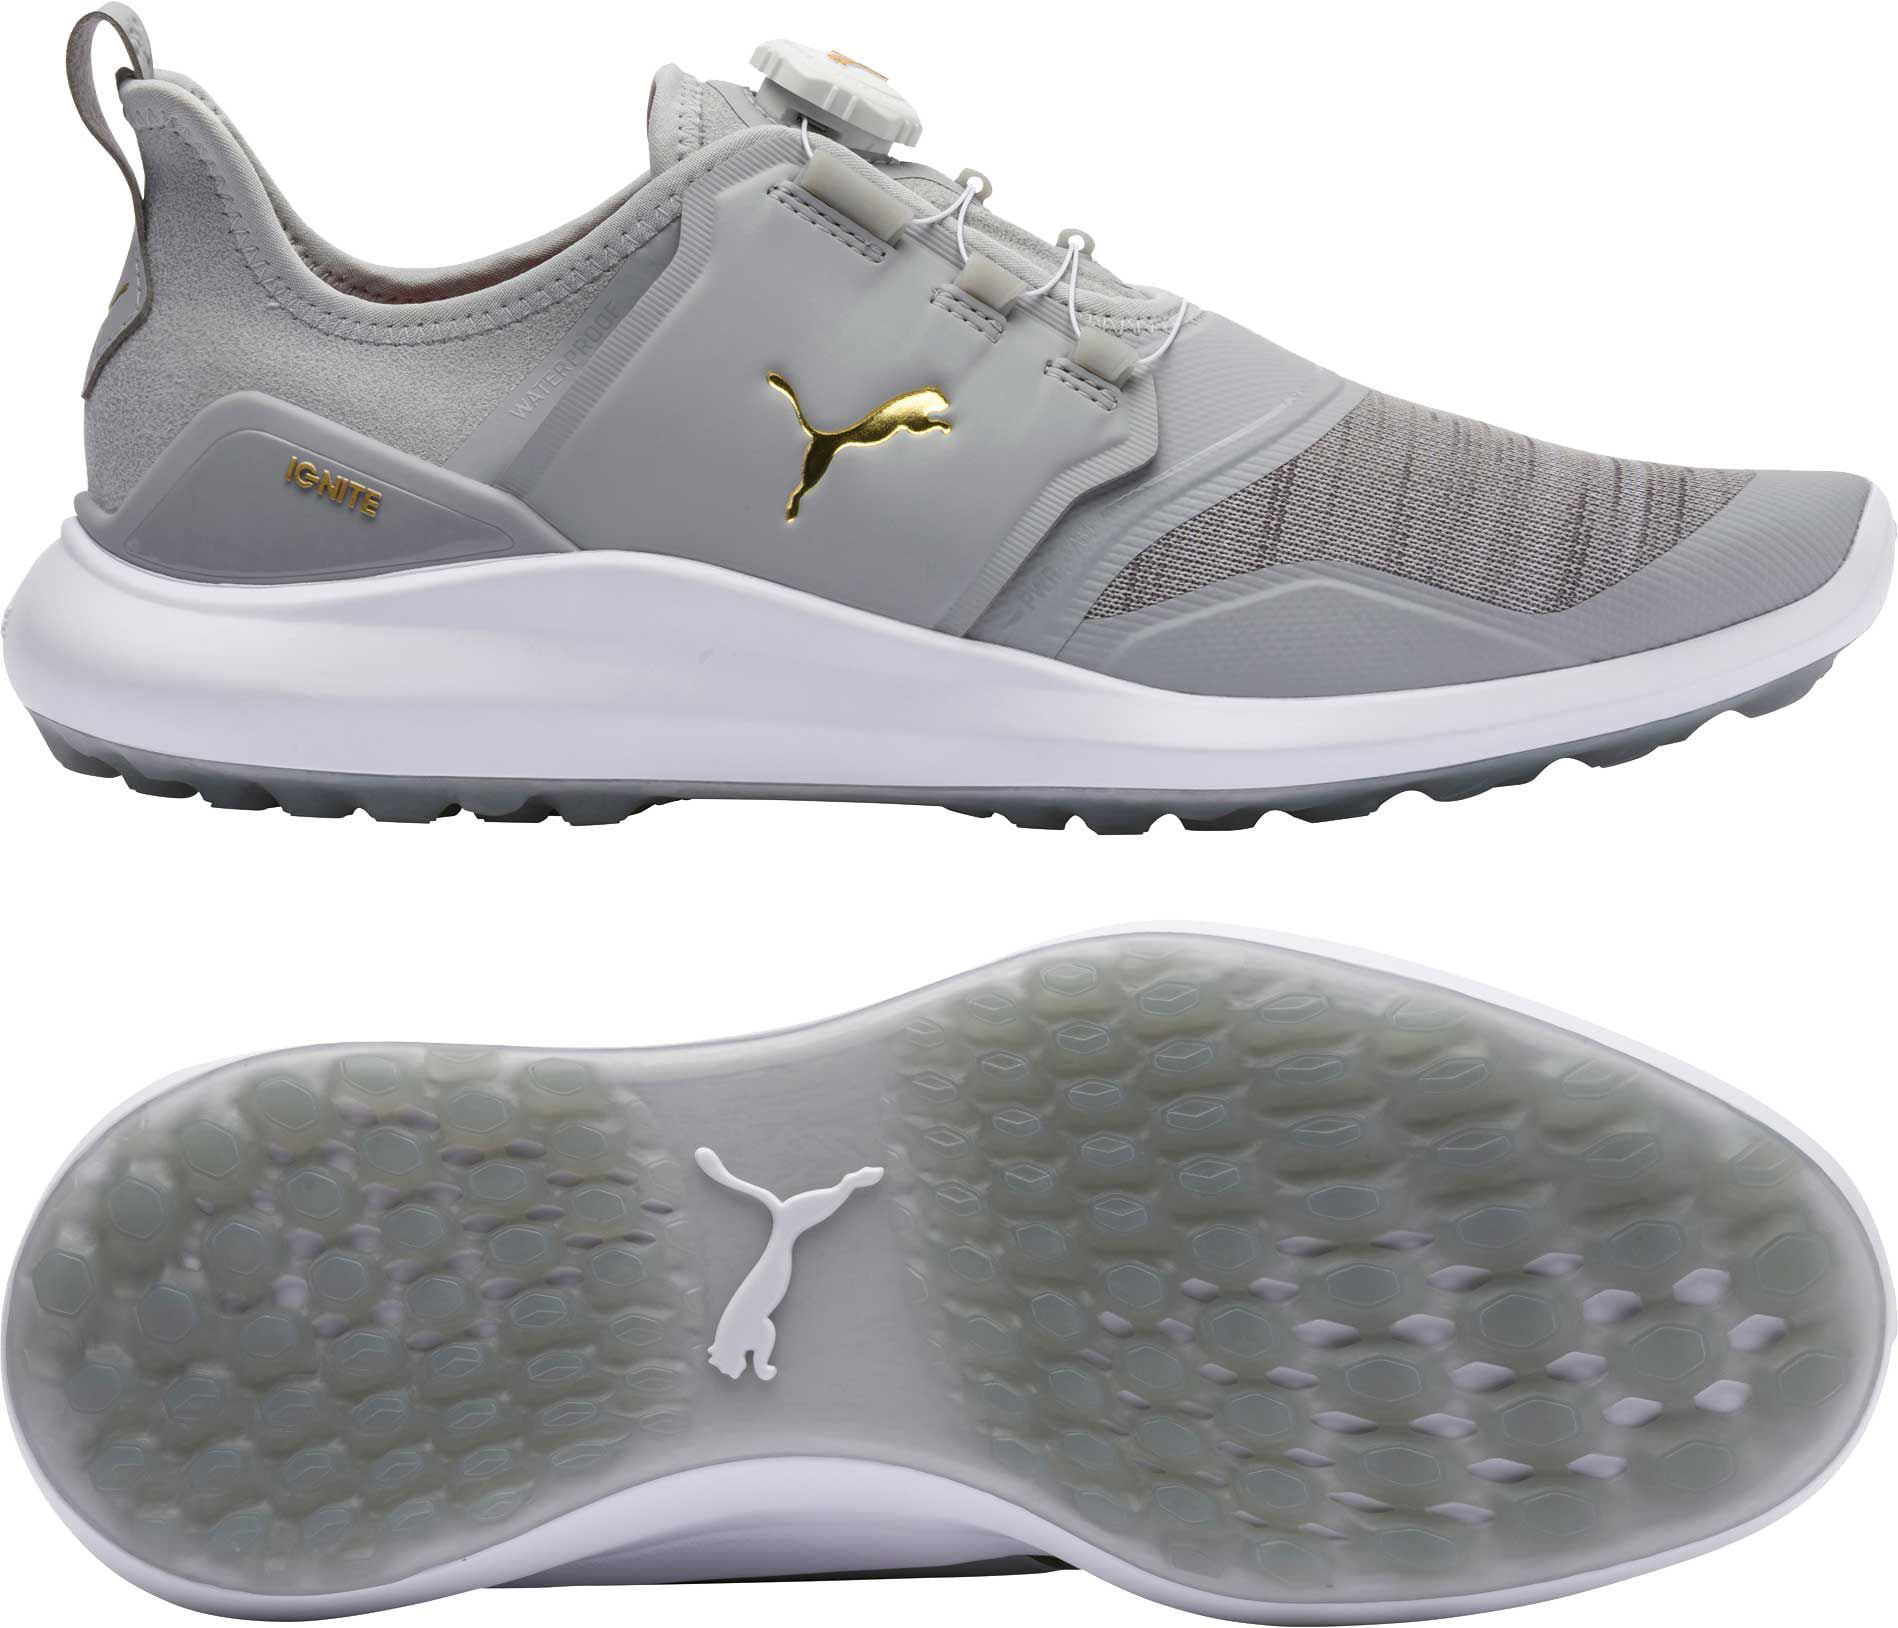 Buy the for sale puma ignite golf shoes